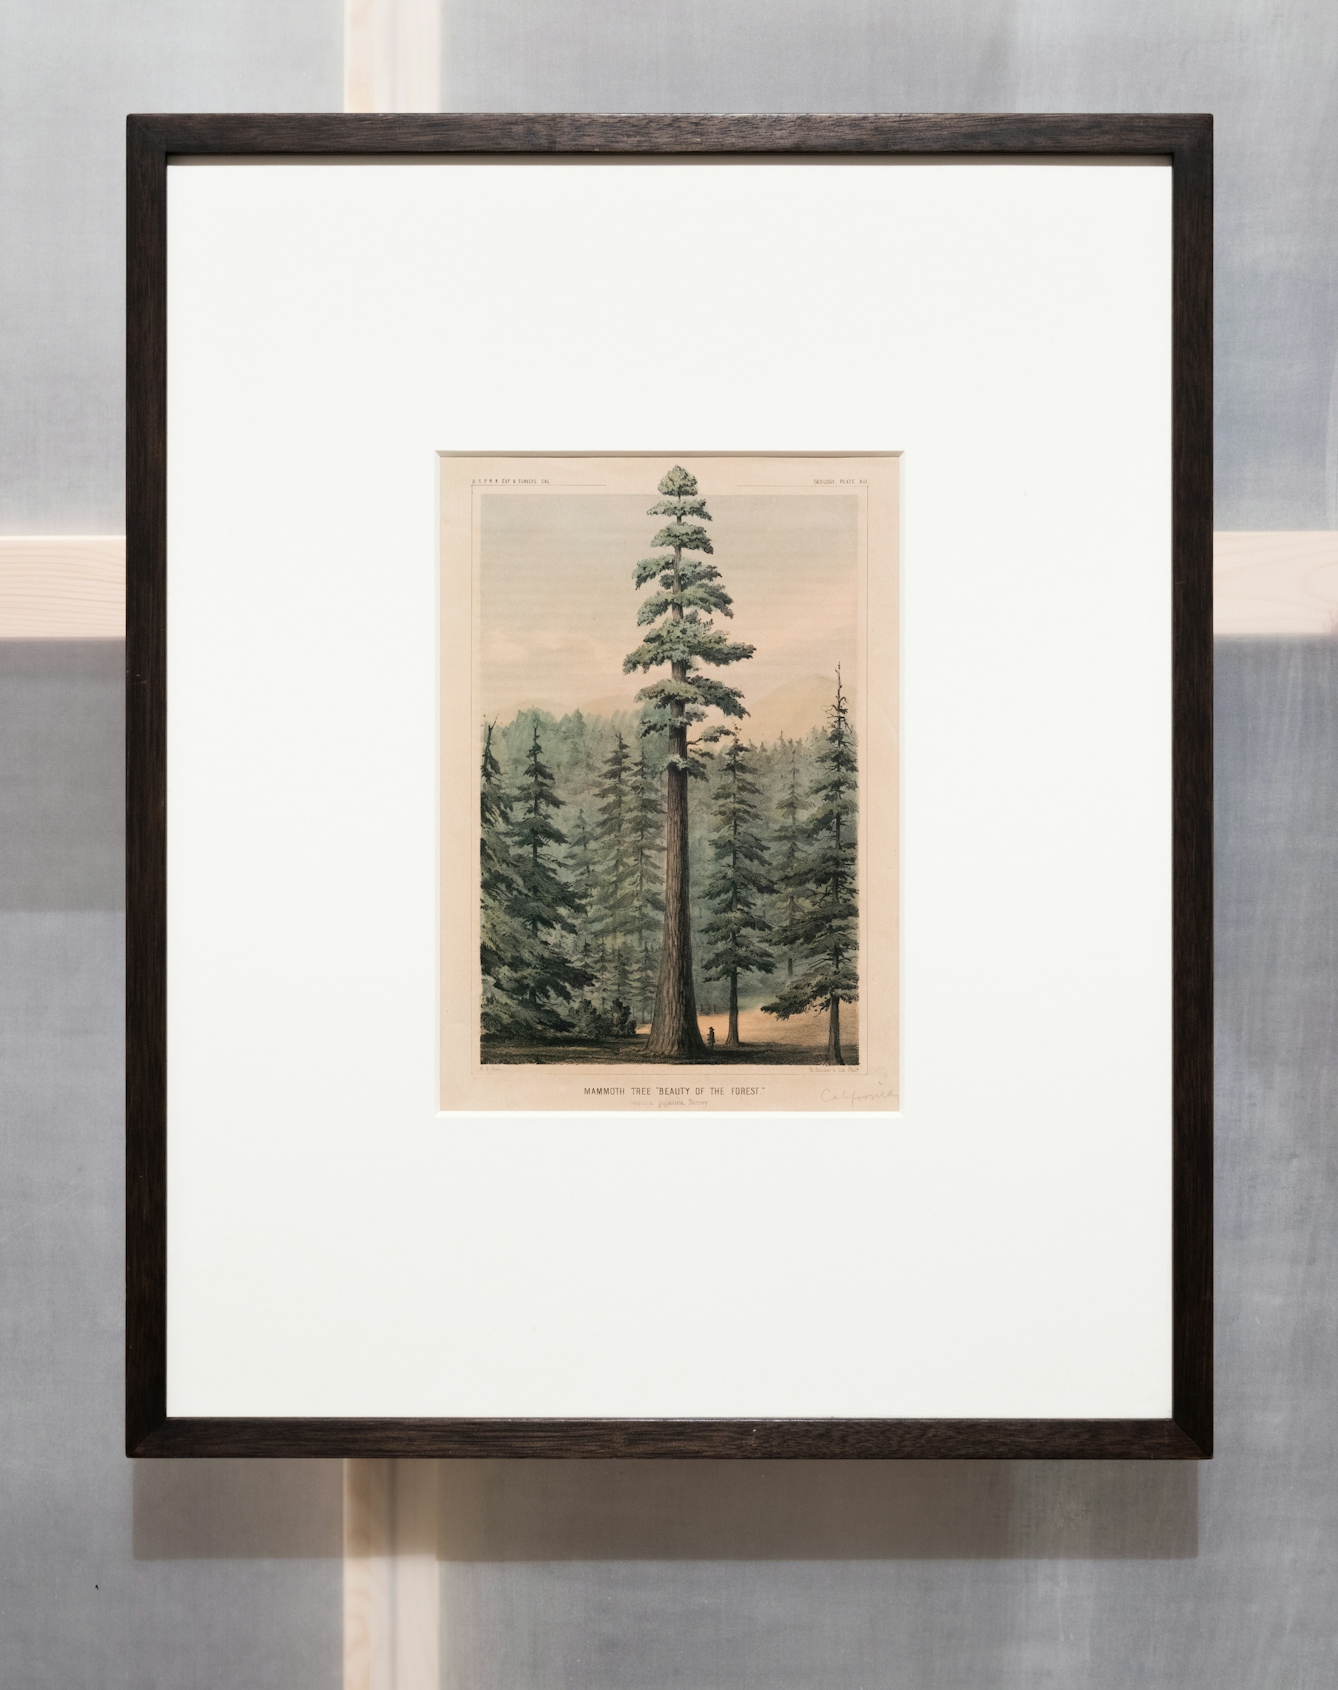 Photograph in an exhibition gallery showing a section of a translucent wall revealing the wooden structure behind, on which a framed print in a wooden frame has been hung. In a window mount within the frame is an engraving of a large Wellingtonia or mammoth tree, towering over the surrounding trees. At the base of the tree is a small human figure. To the top and bottom of the engraving is a line of text.